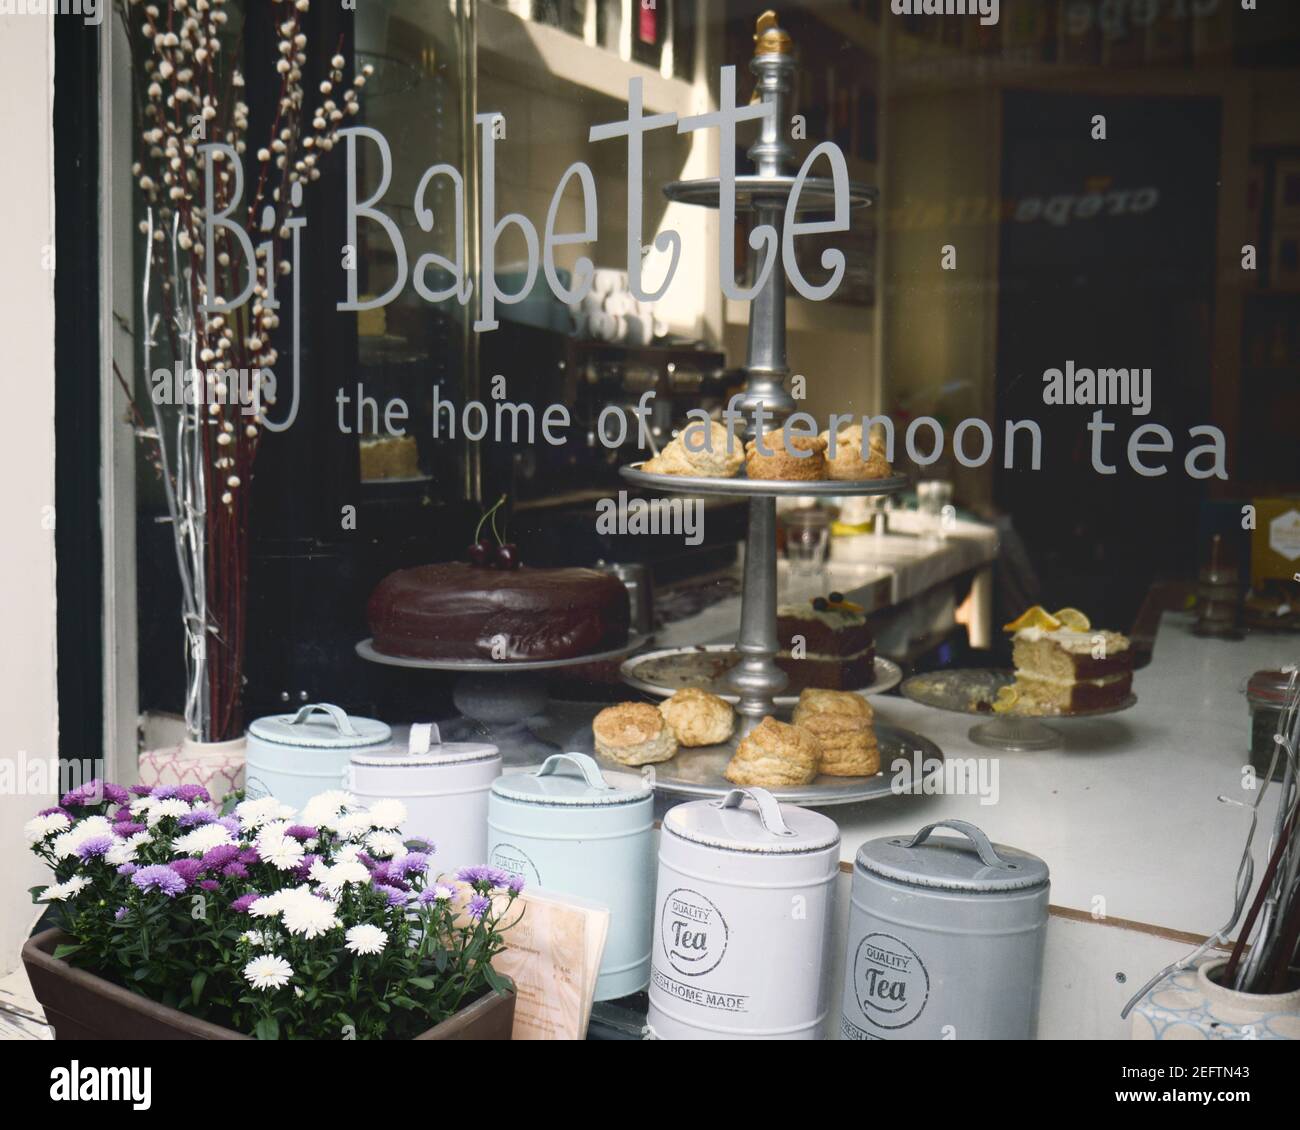 Shop window of a Traditional Tea House With Pastries and Tea Canisters, Haarlem, Amsterdam, The Netherlands Stock Photo